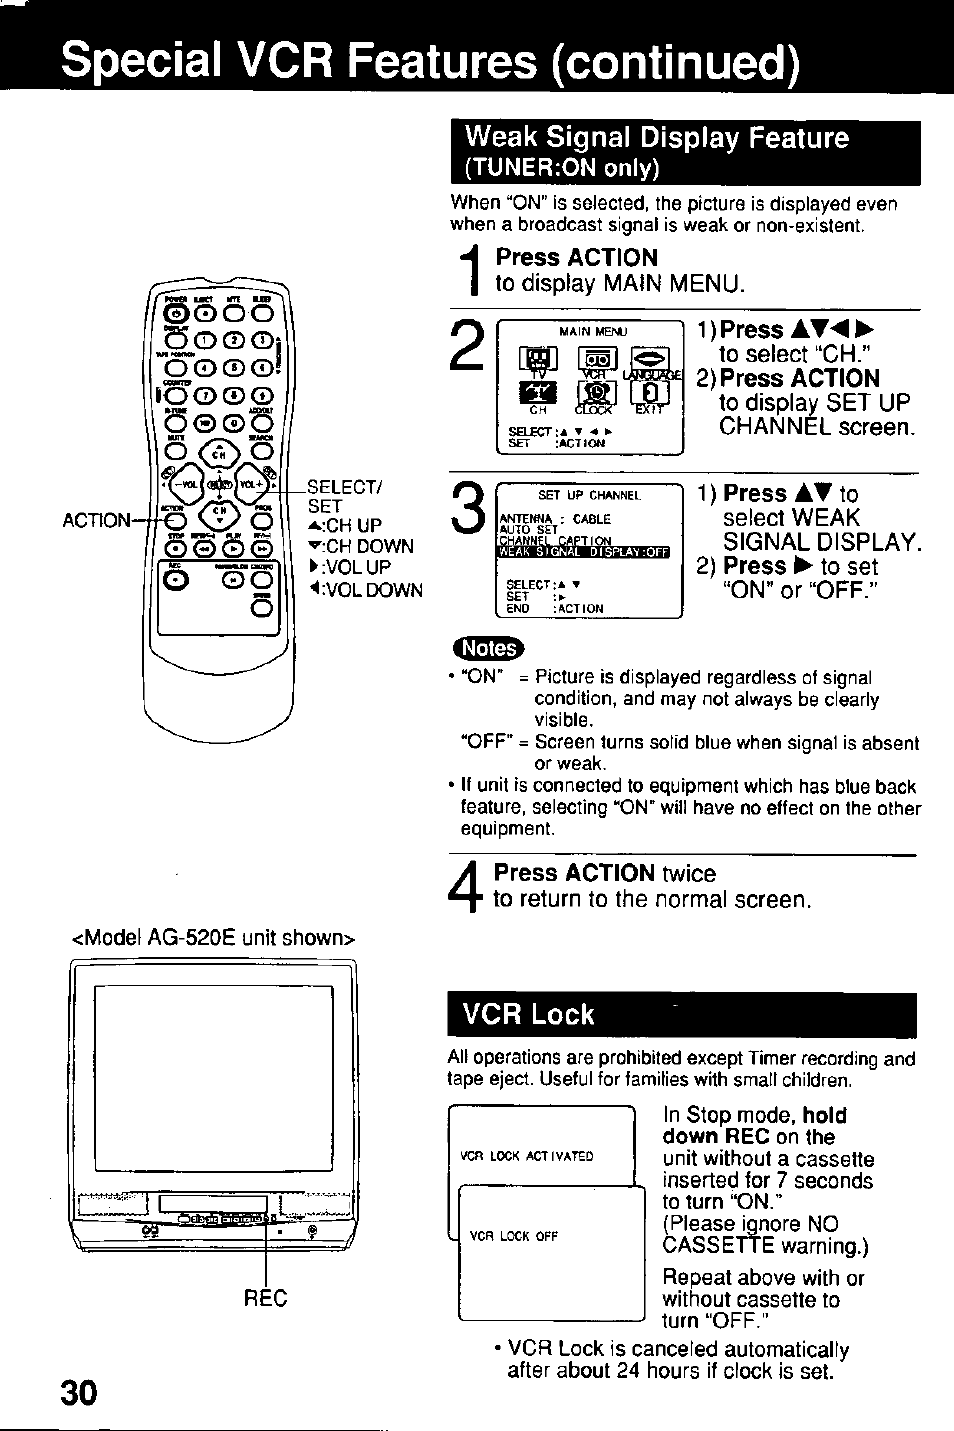 Special vcr features (continued), Cd o o, 9x<s>o | Weak signal display feature, Tuner:on only), Press action, To display main menu, 1) press, To select “ch, 2) press action | Panasonic Combinatin VCR AG-513E User Manual | Page 30 / 40